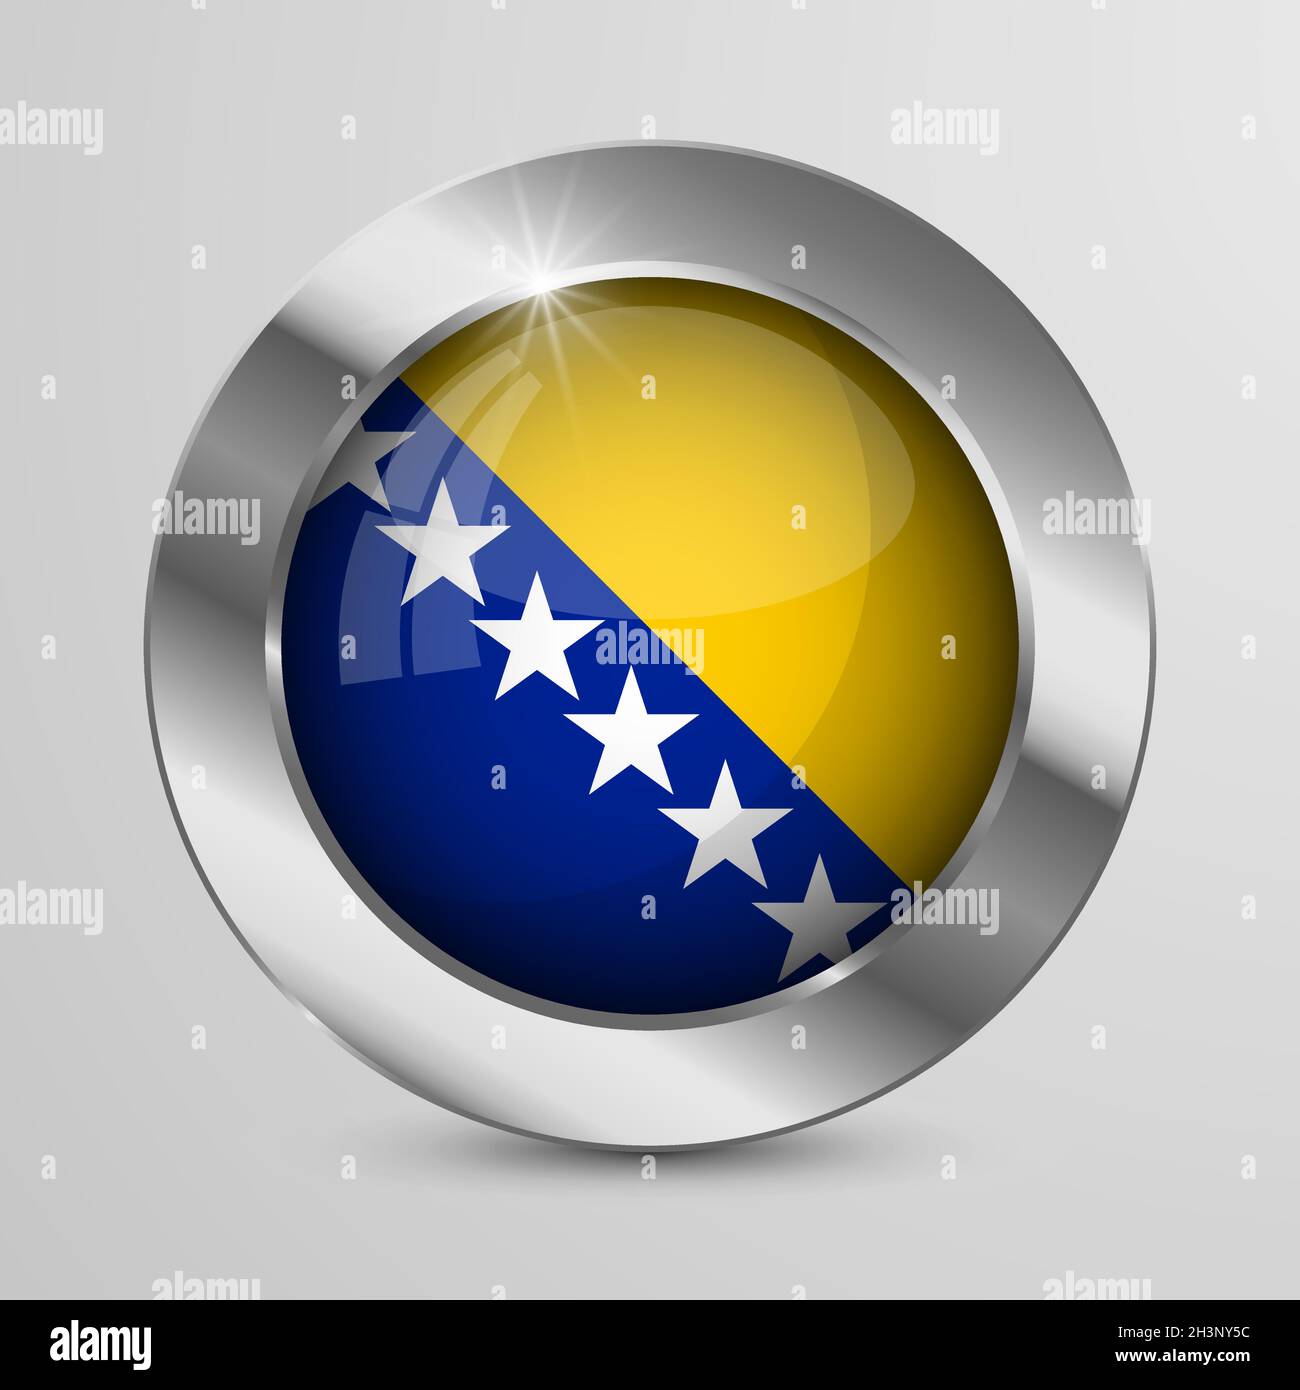 EPS10 Vector Patriotic Button with Bosnia and Herzegovina flag colors. An element of impact for the use you want to make of it. Stock Vector